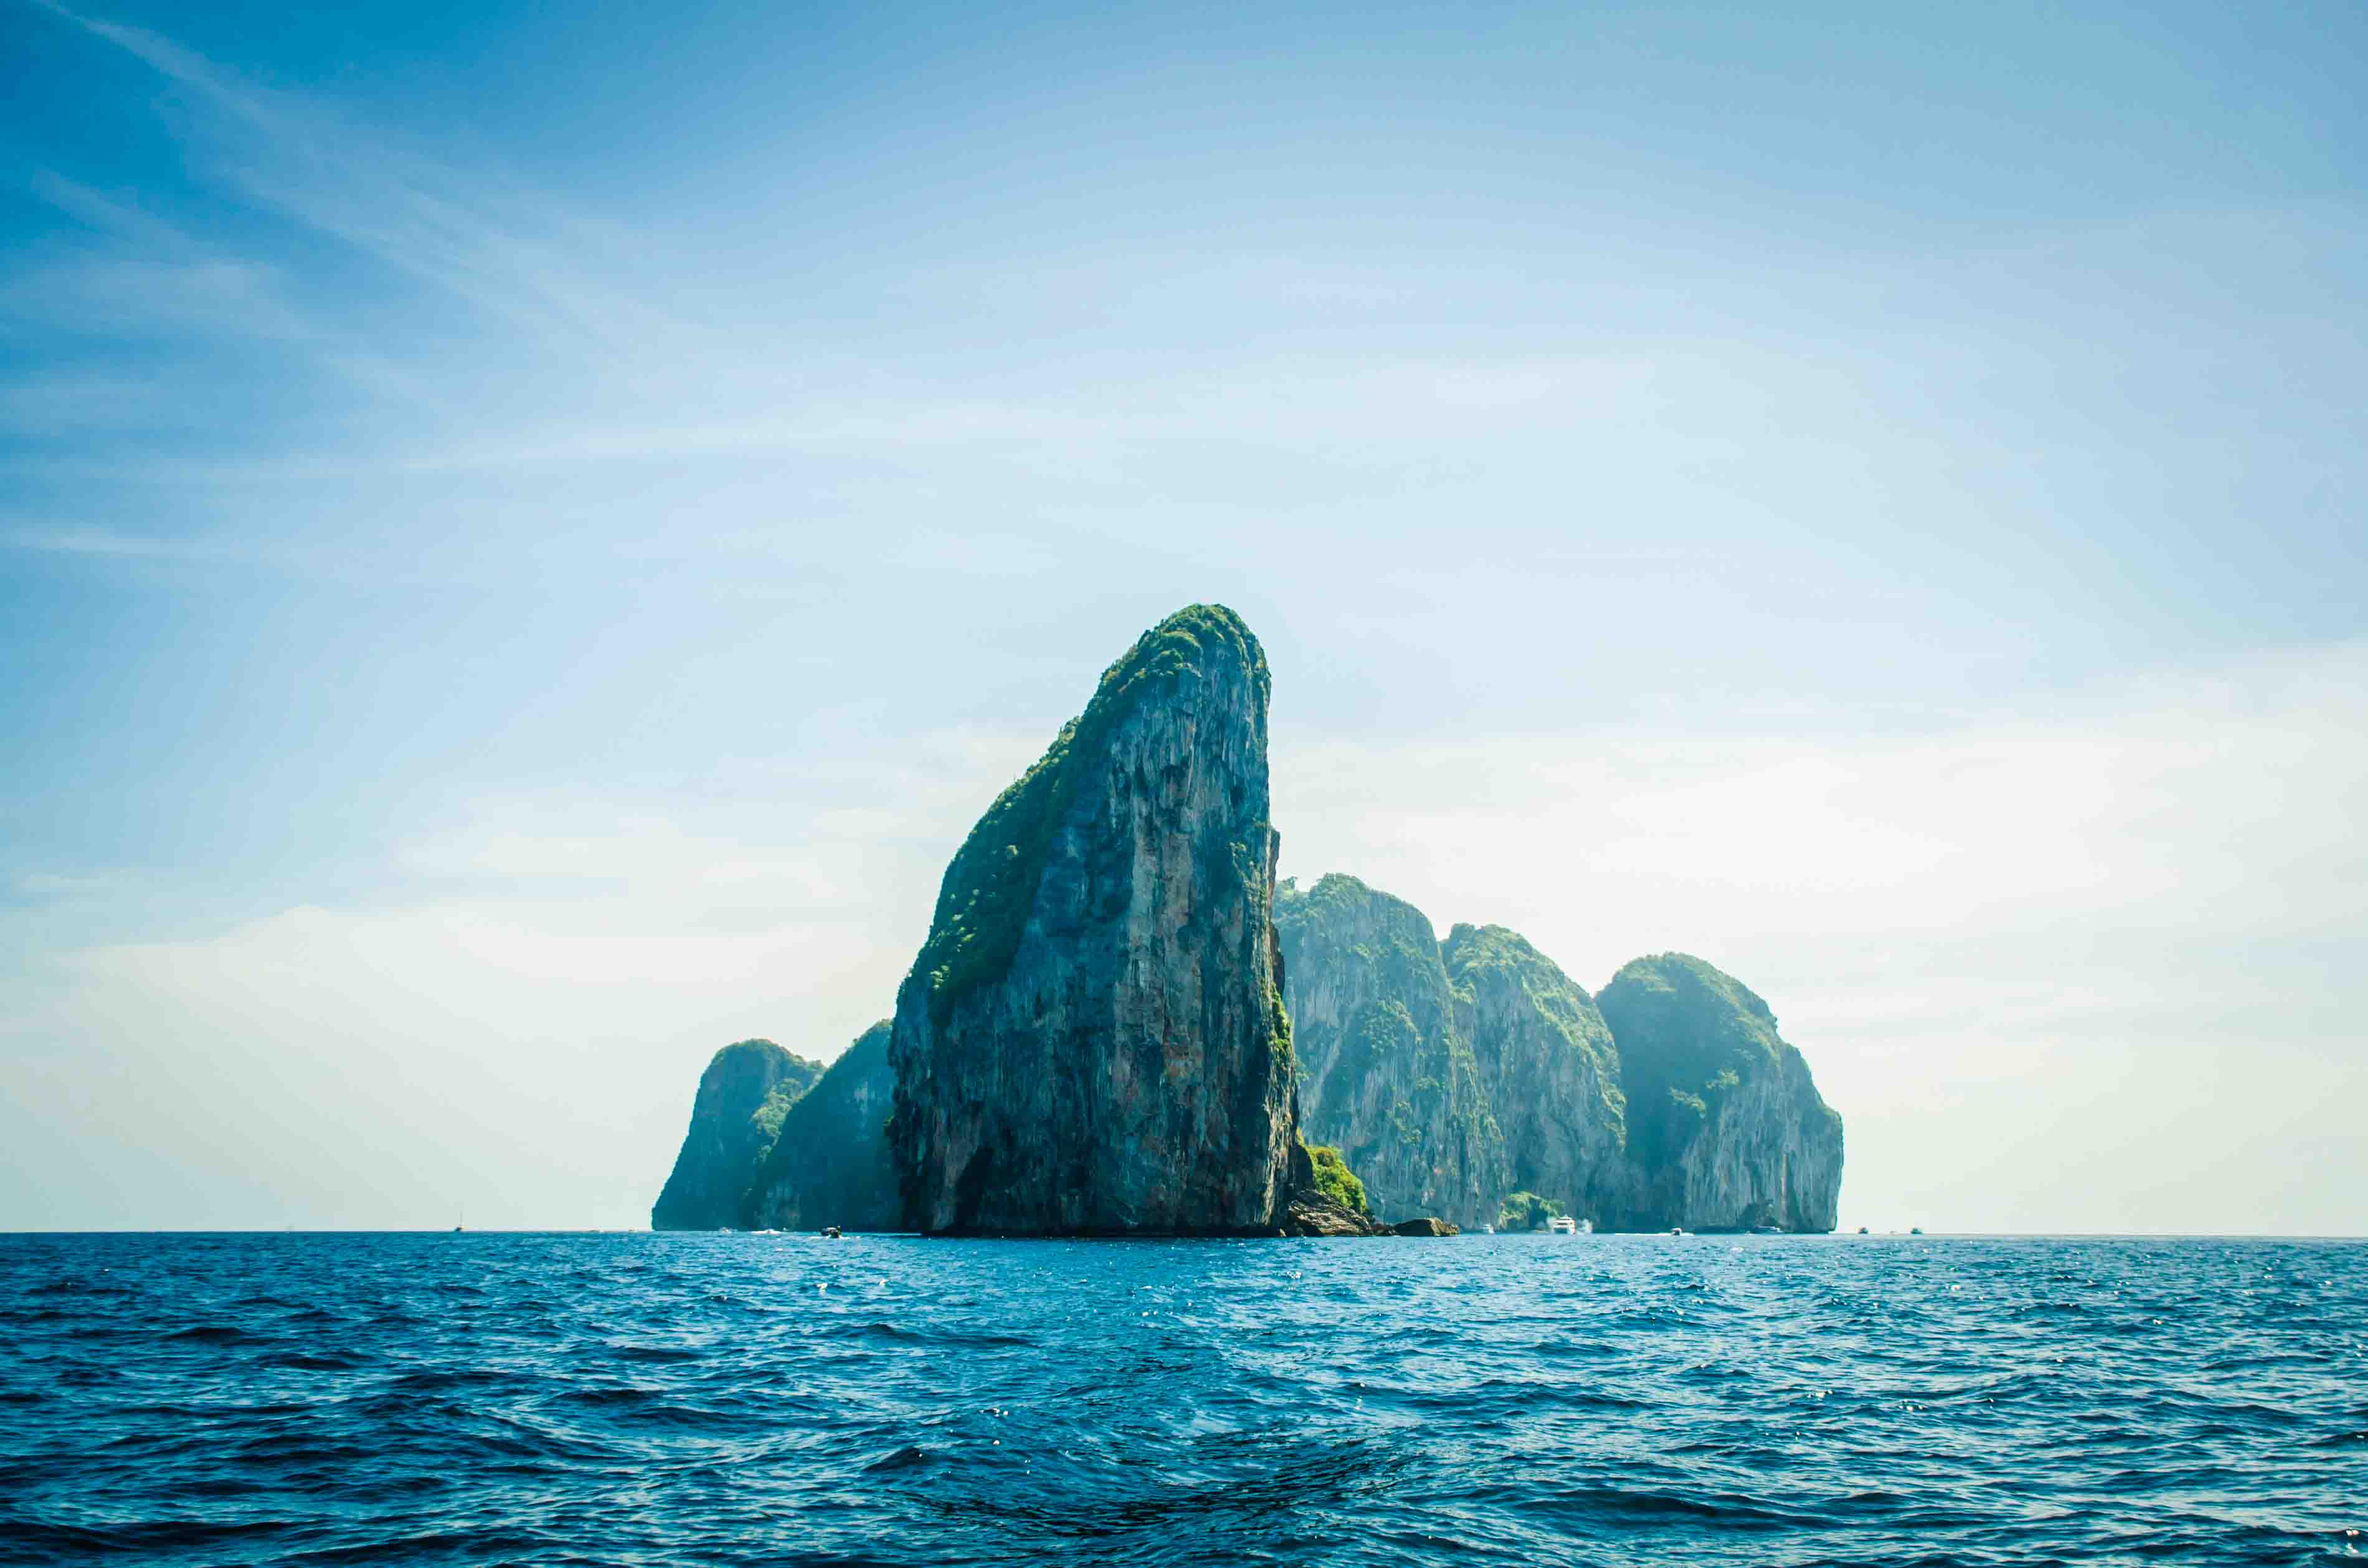 Thailand's lesser-known islands: A definitive guide